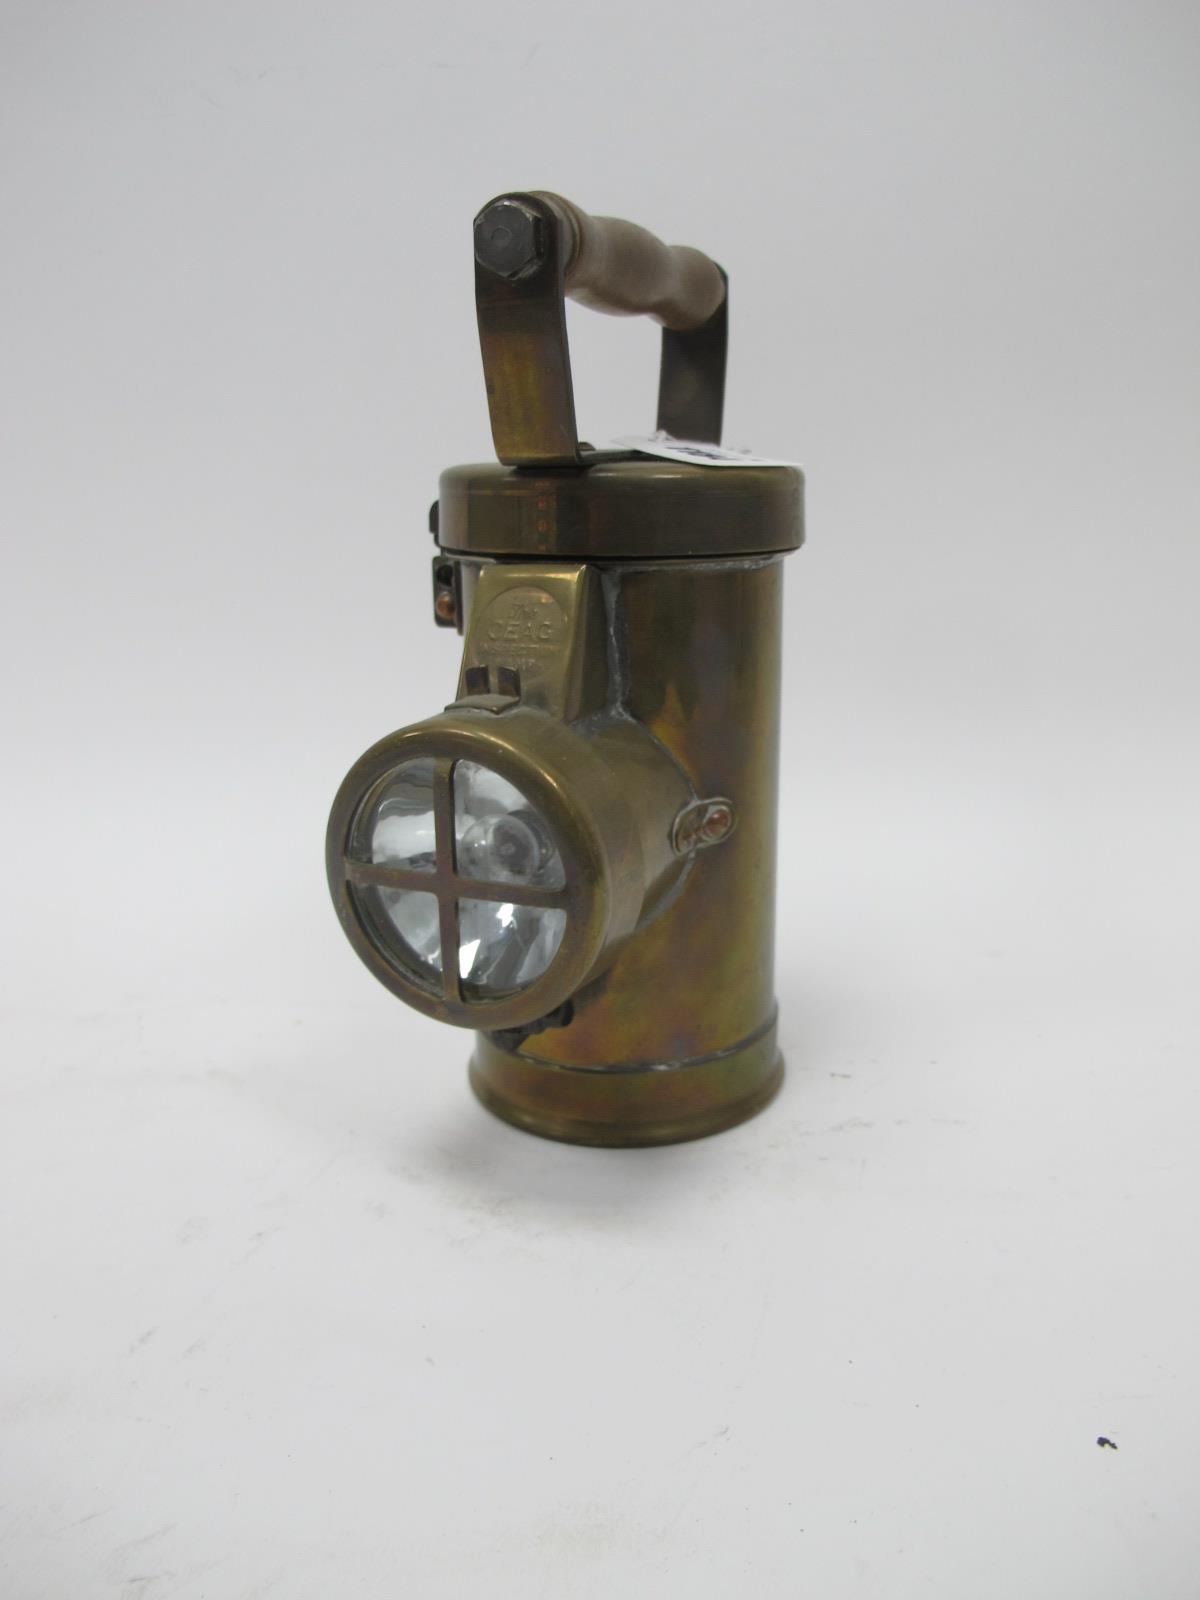 Miners Lamp, The Ceag Inspection Lamp, Barnsley, Yorks, 309721/28, brass body, turned wooden handle,